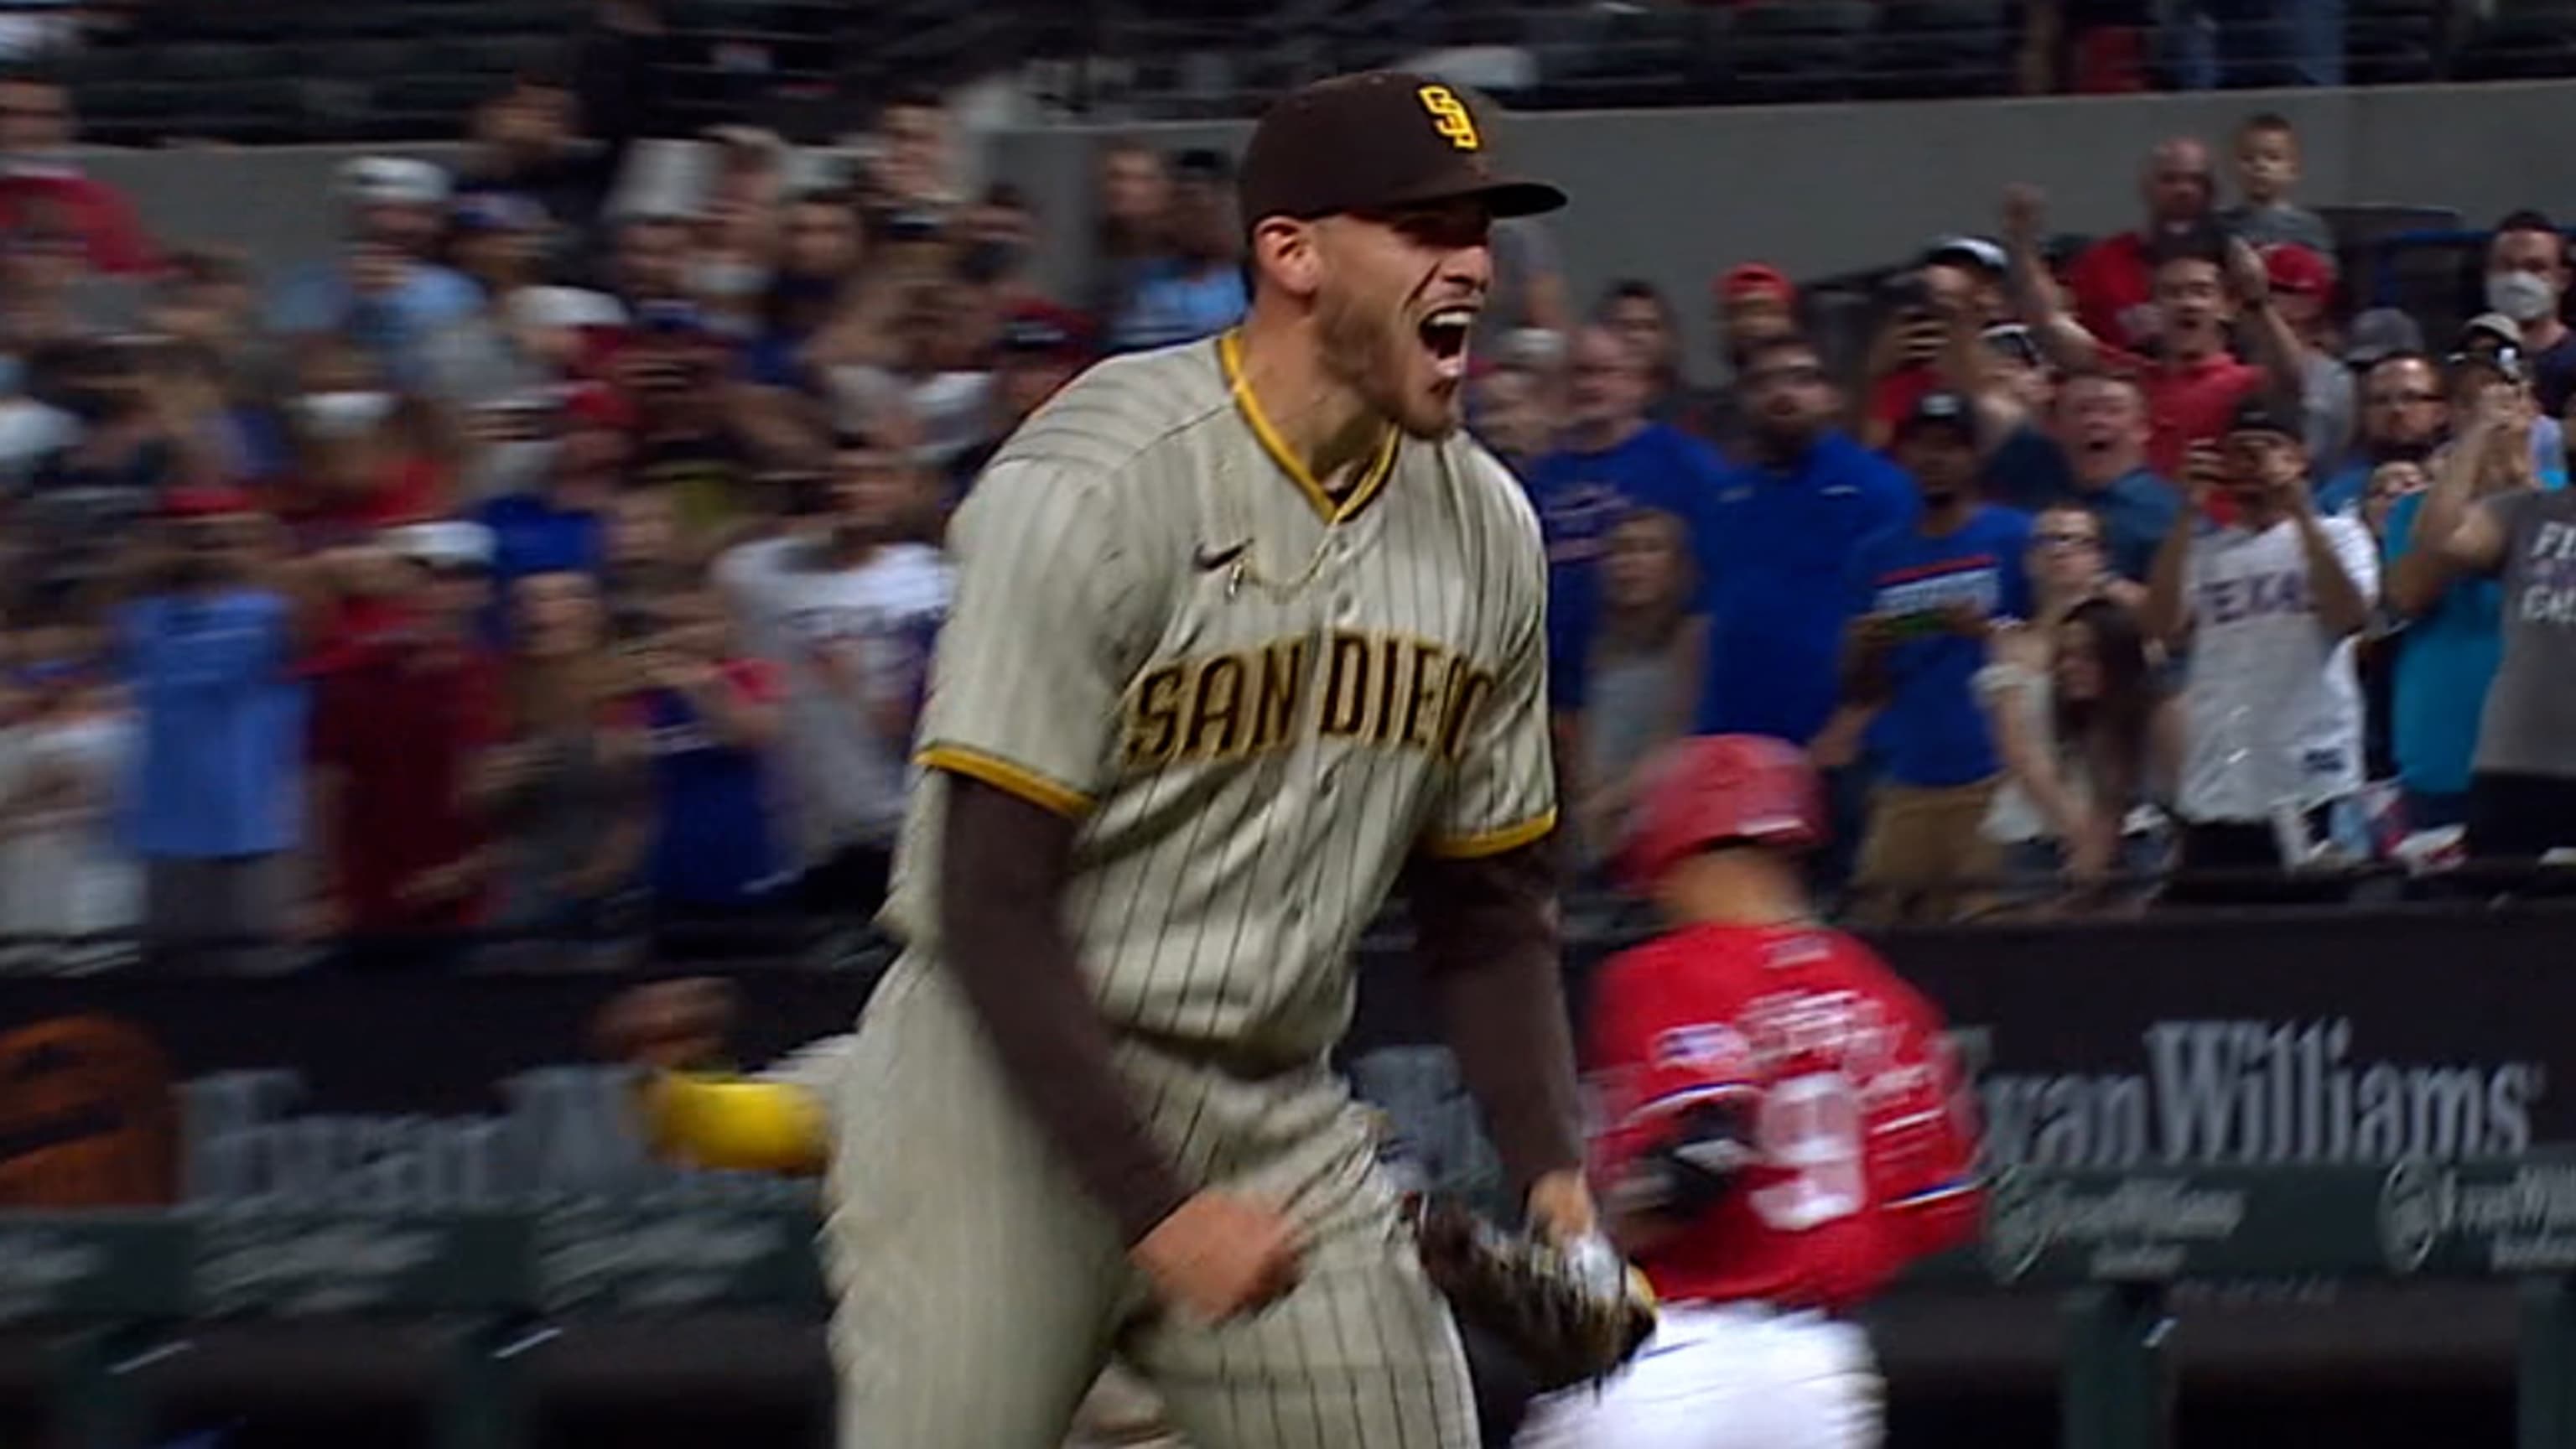 Joe Musgrove Throws First No-Hitter in Padres History - The New